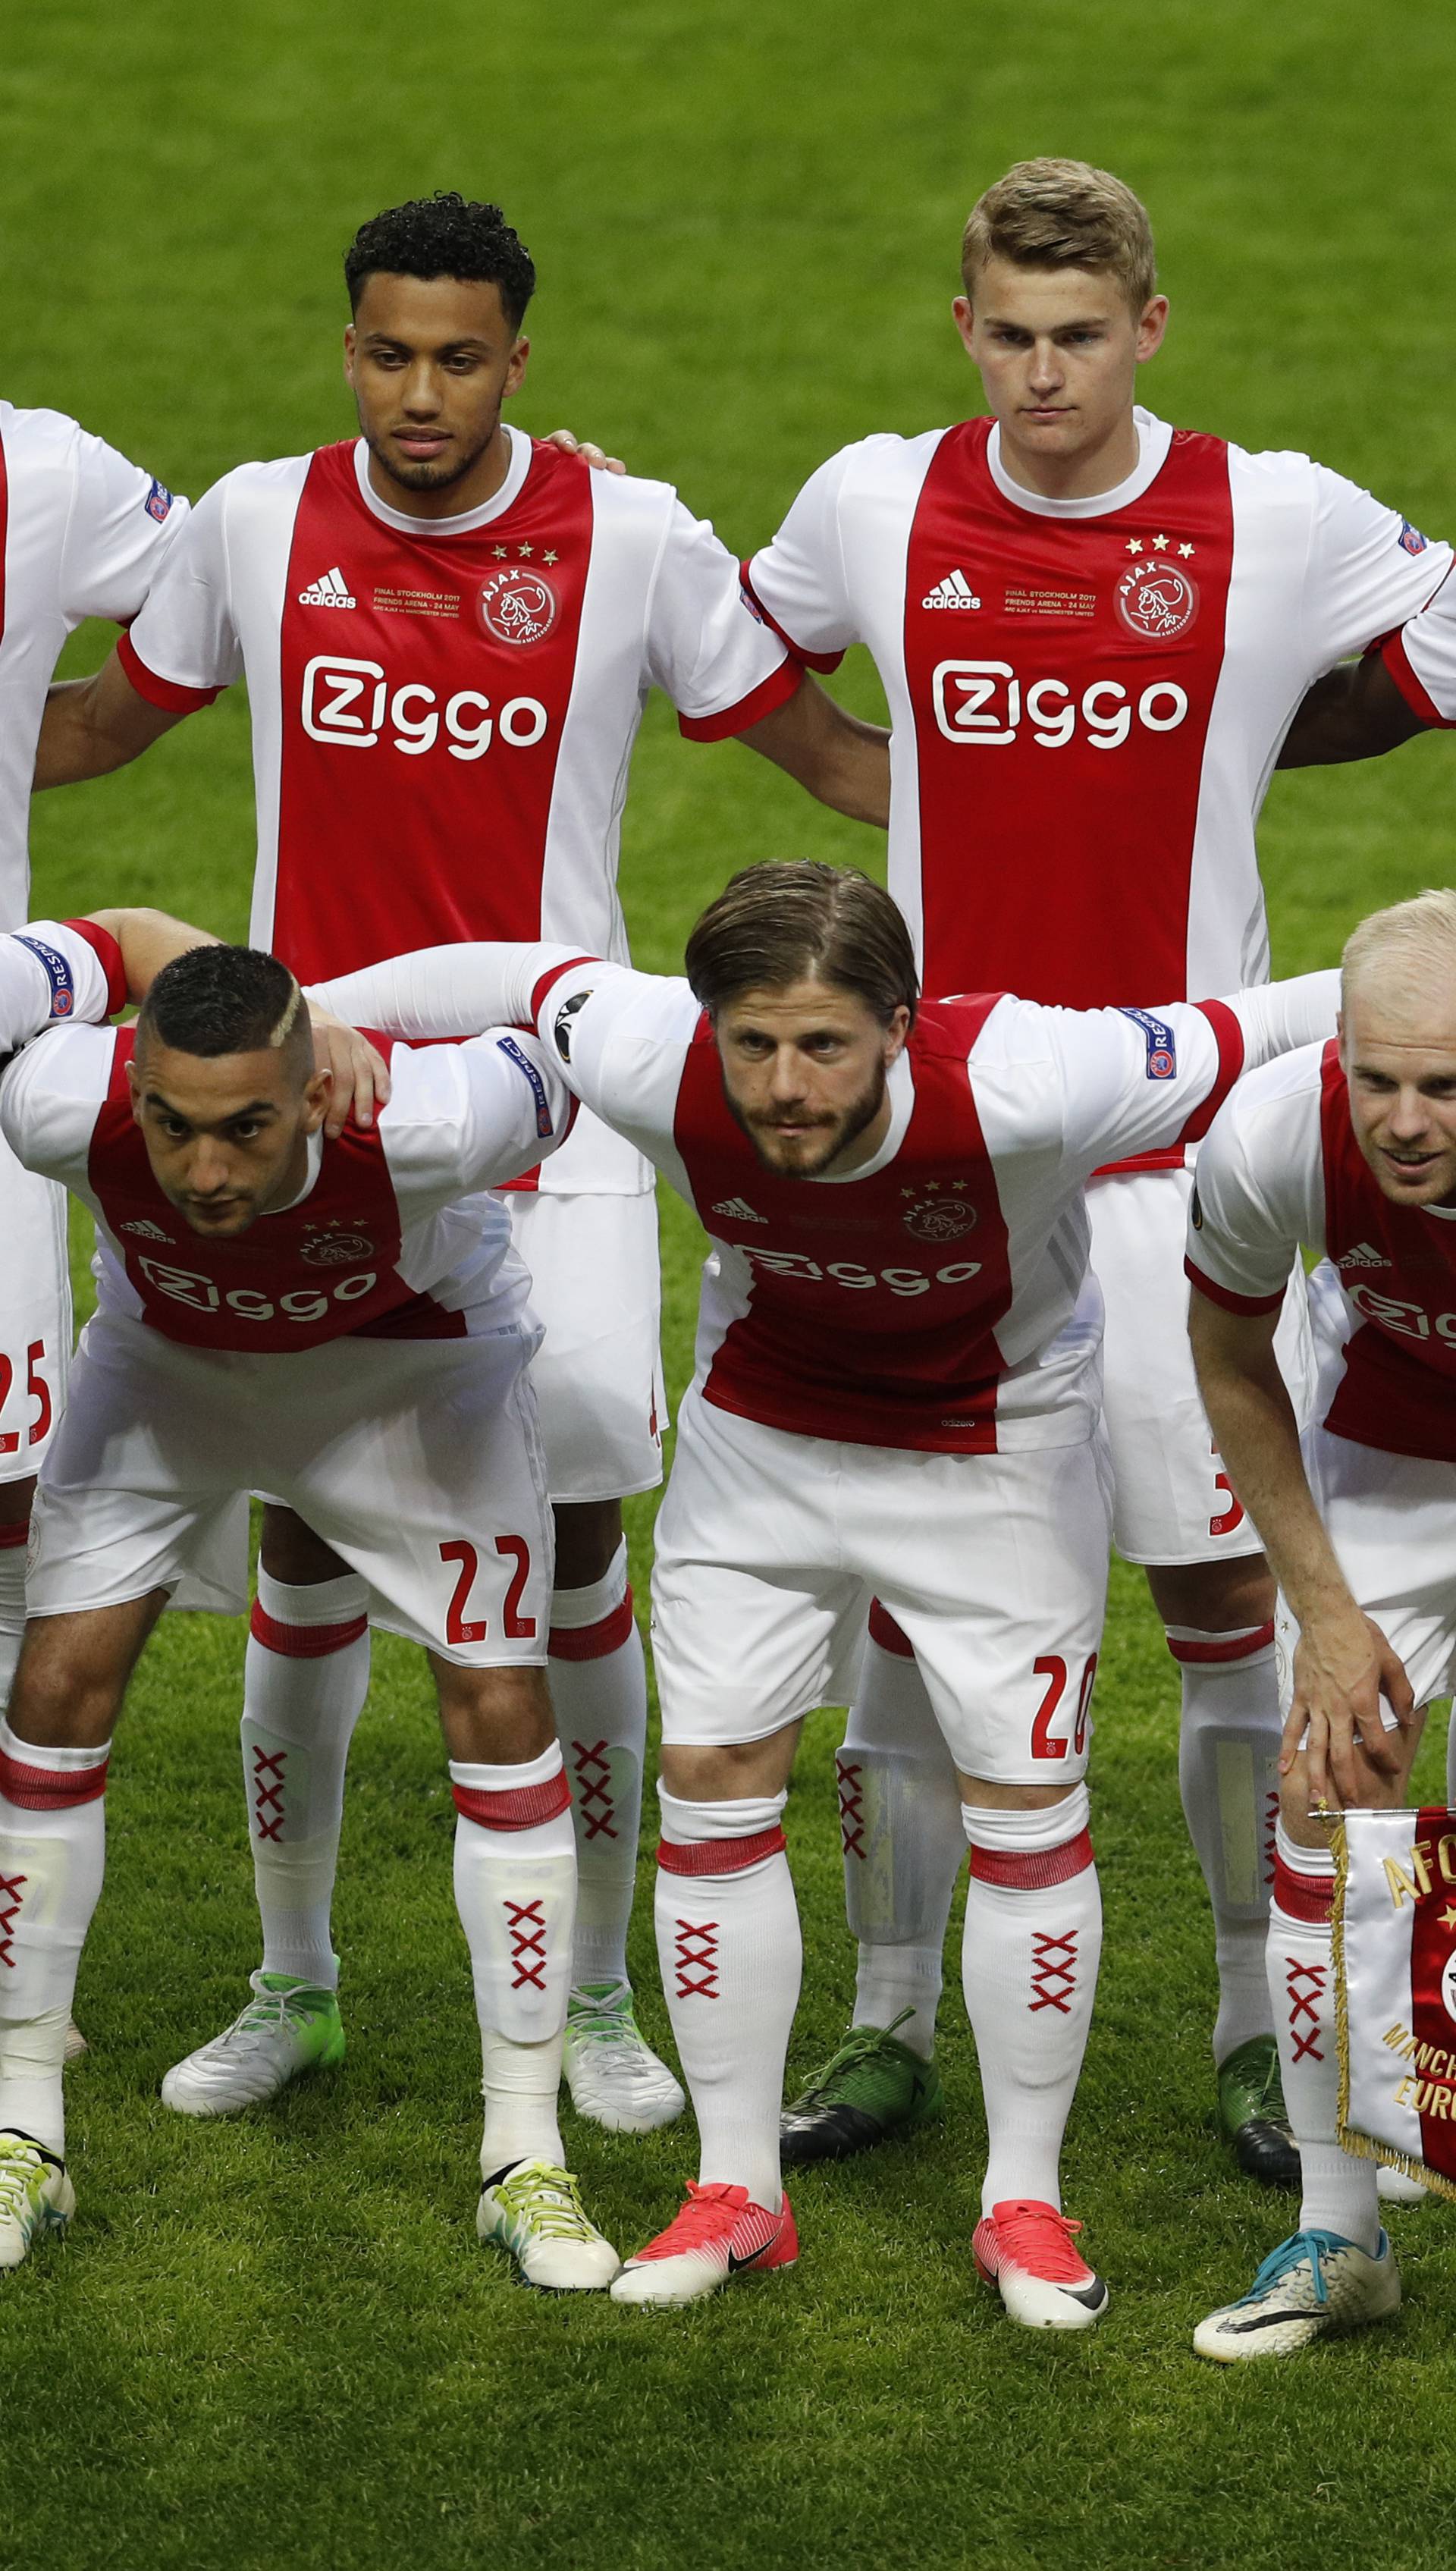 Ajax players pose for a team photo before the match